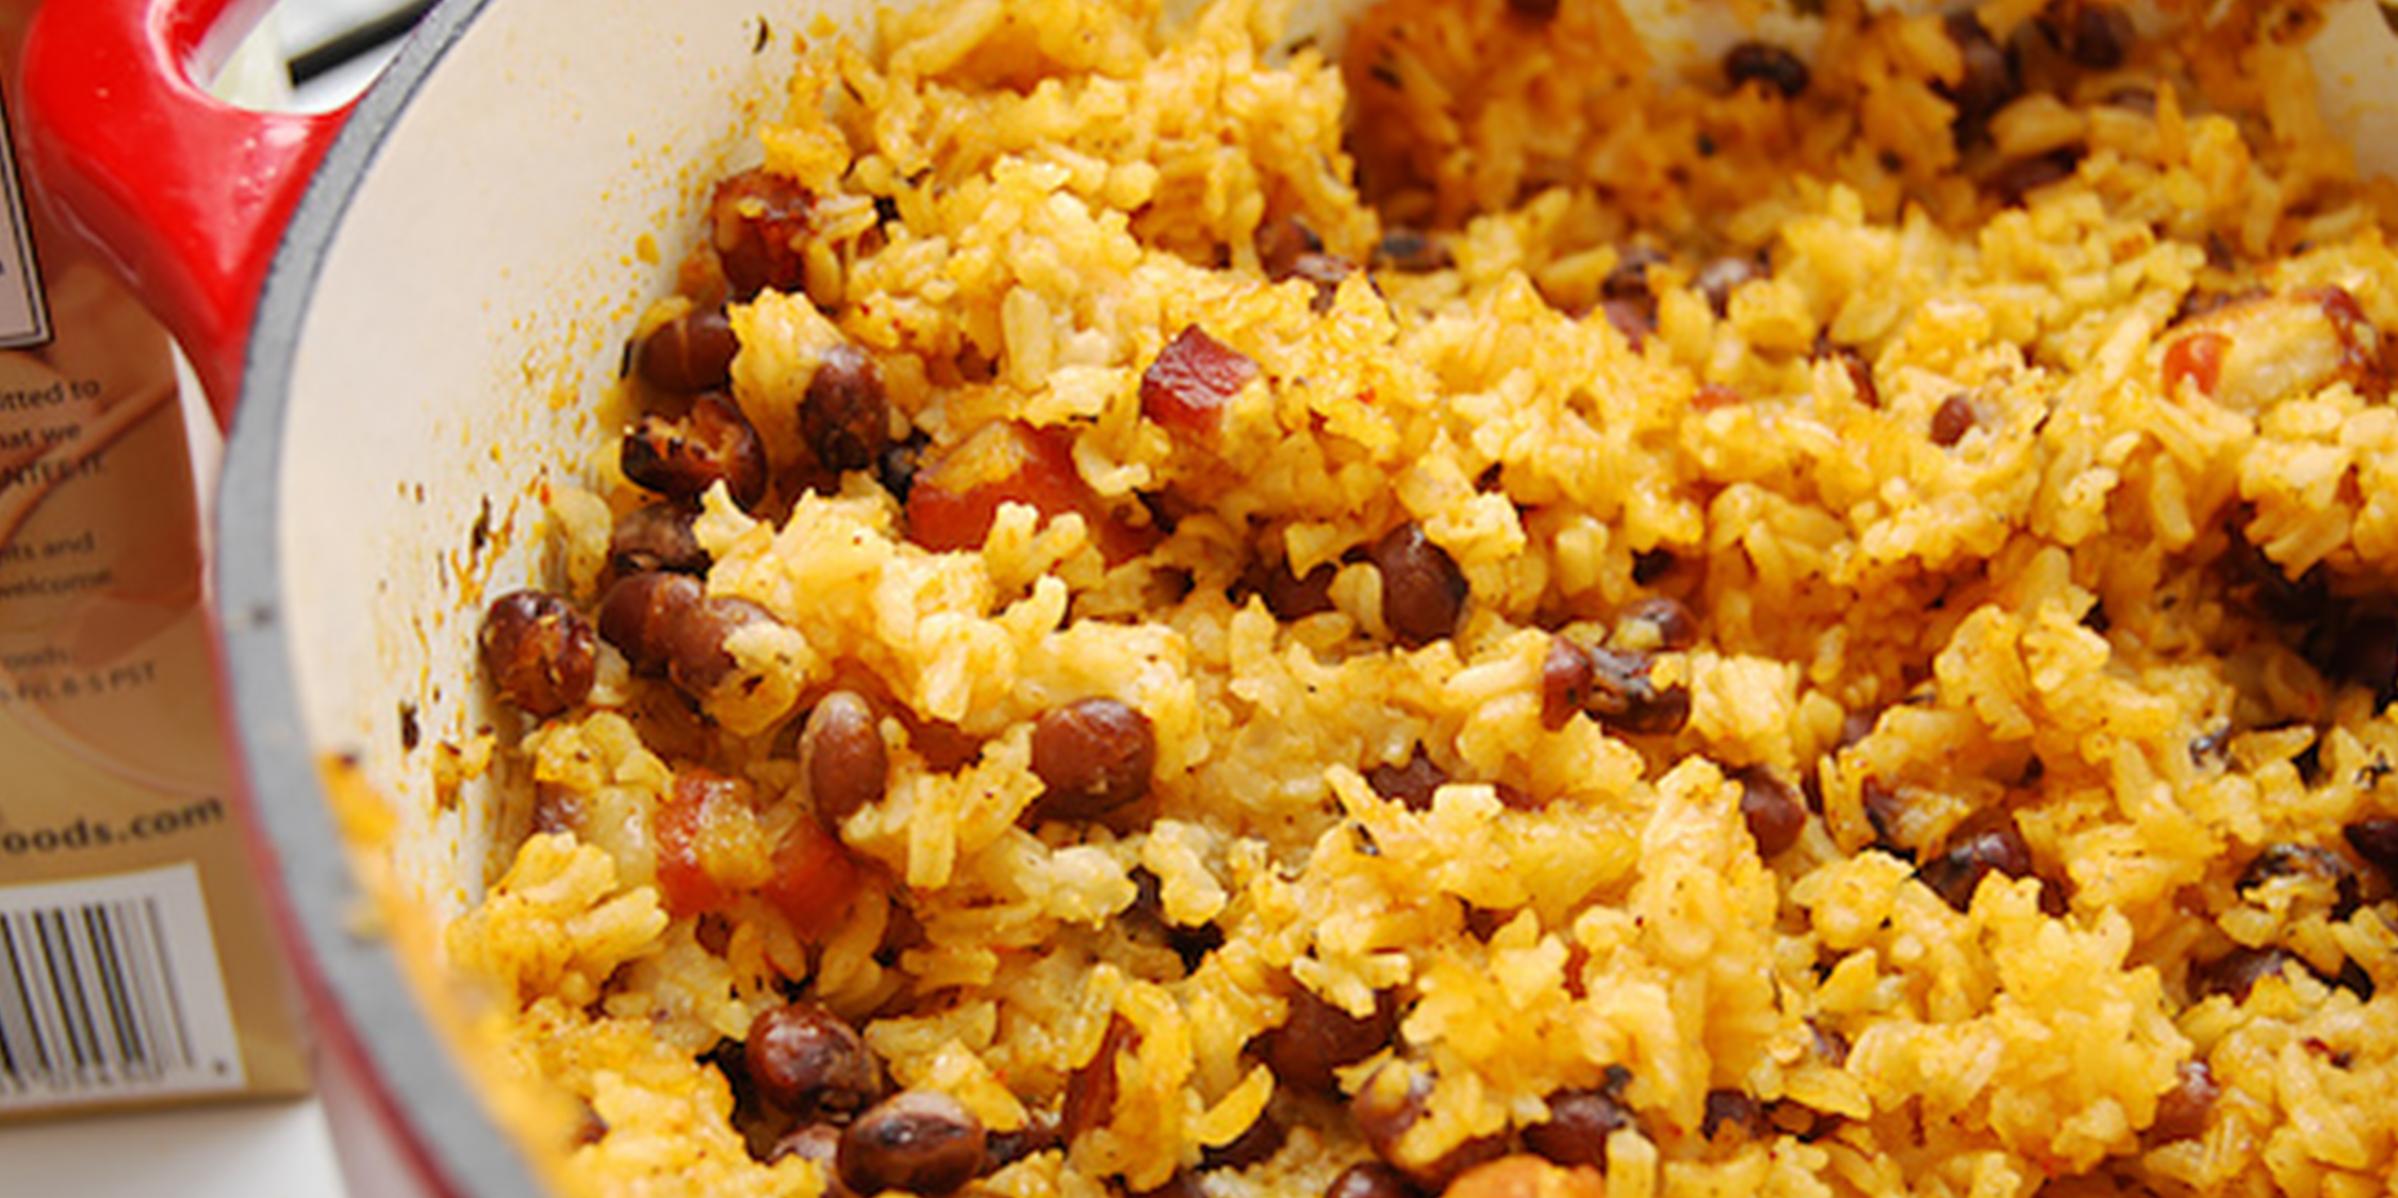  Mouth-watering recipe that will make you feel like you're in the Caribbean.